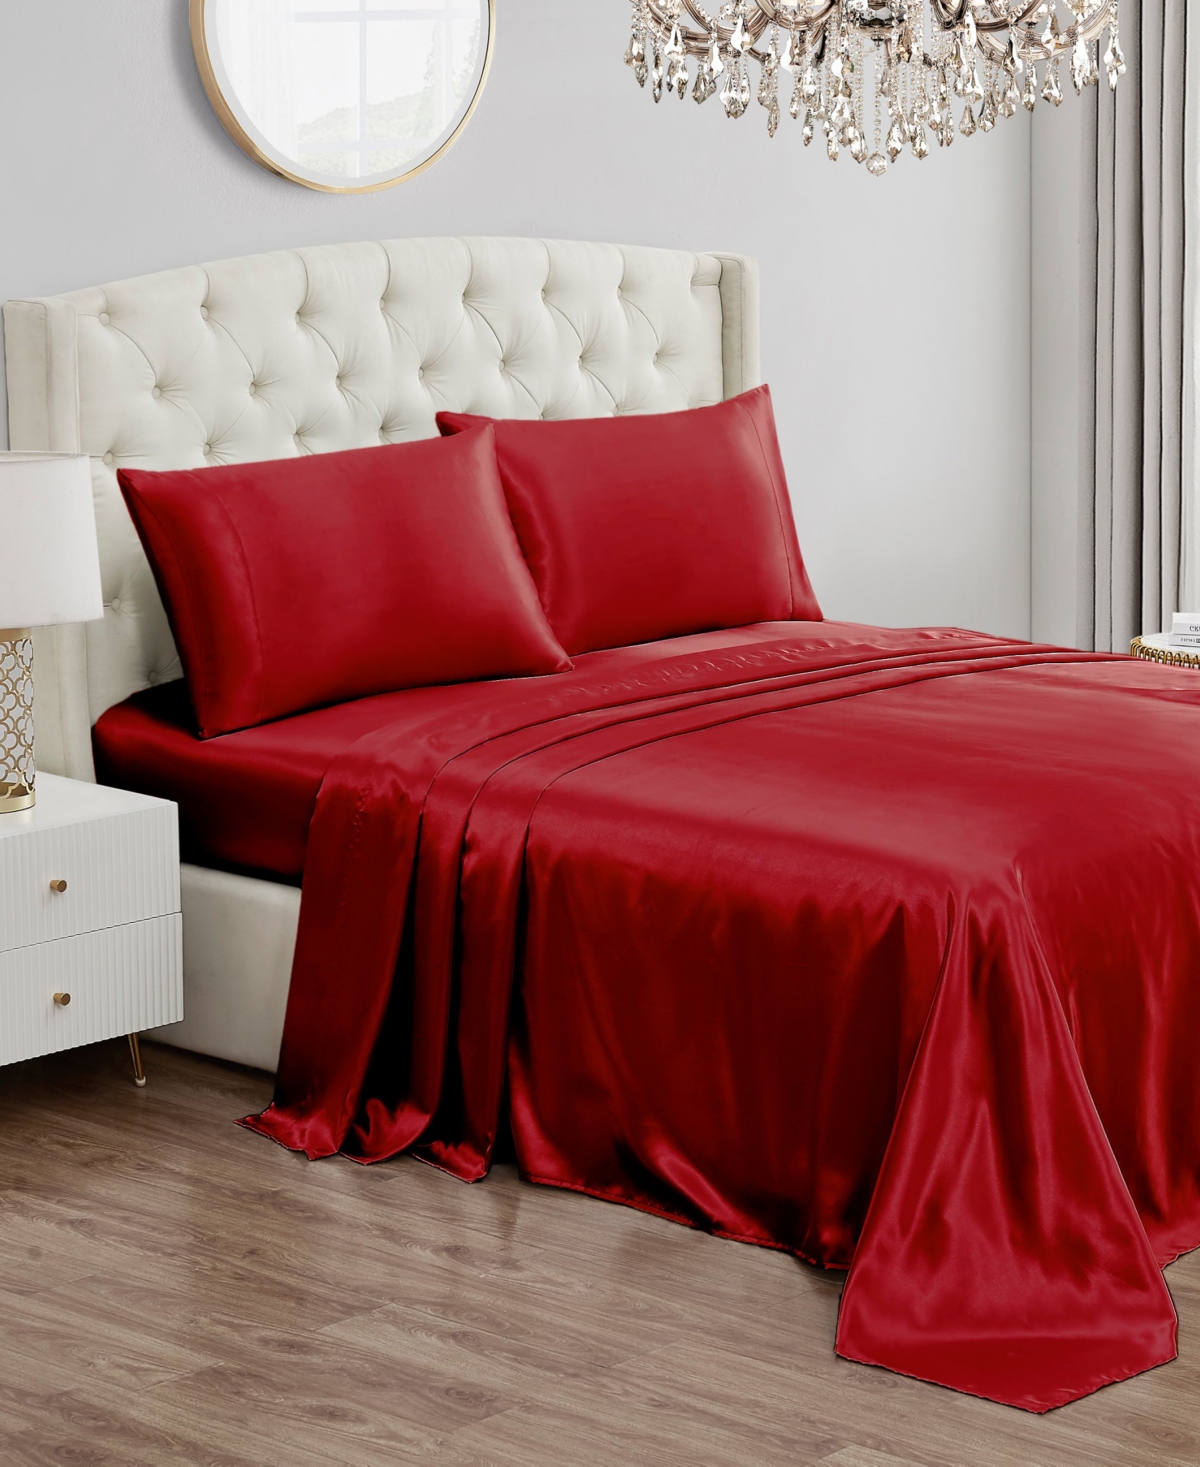 Juicy Couture Satin 3 Piece Sheet Set, Twin In Red